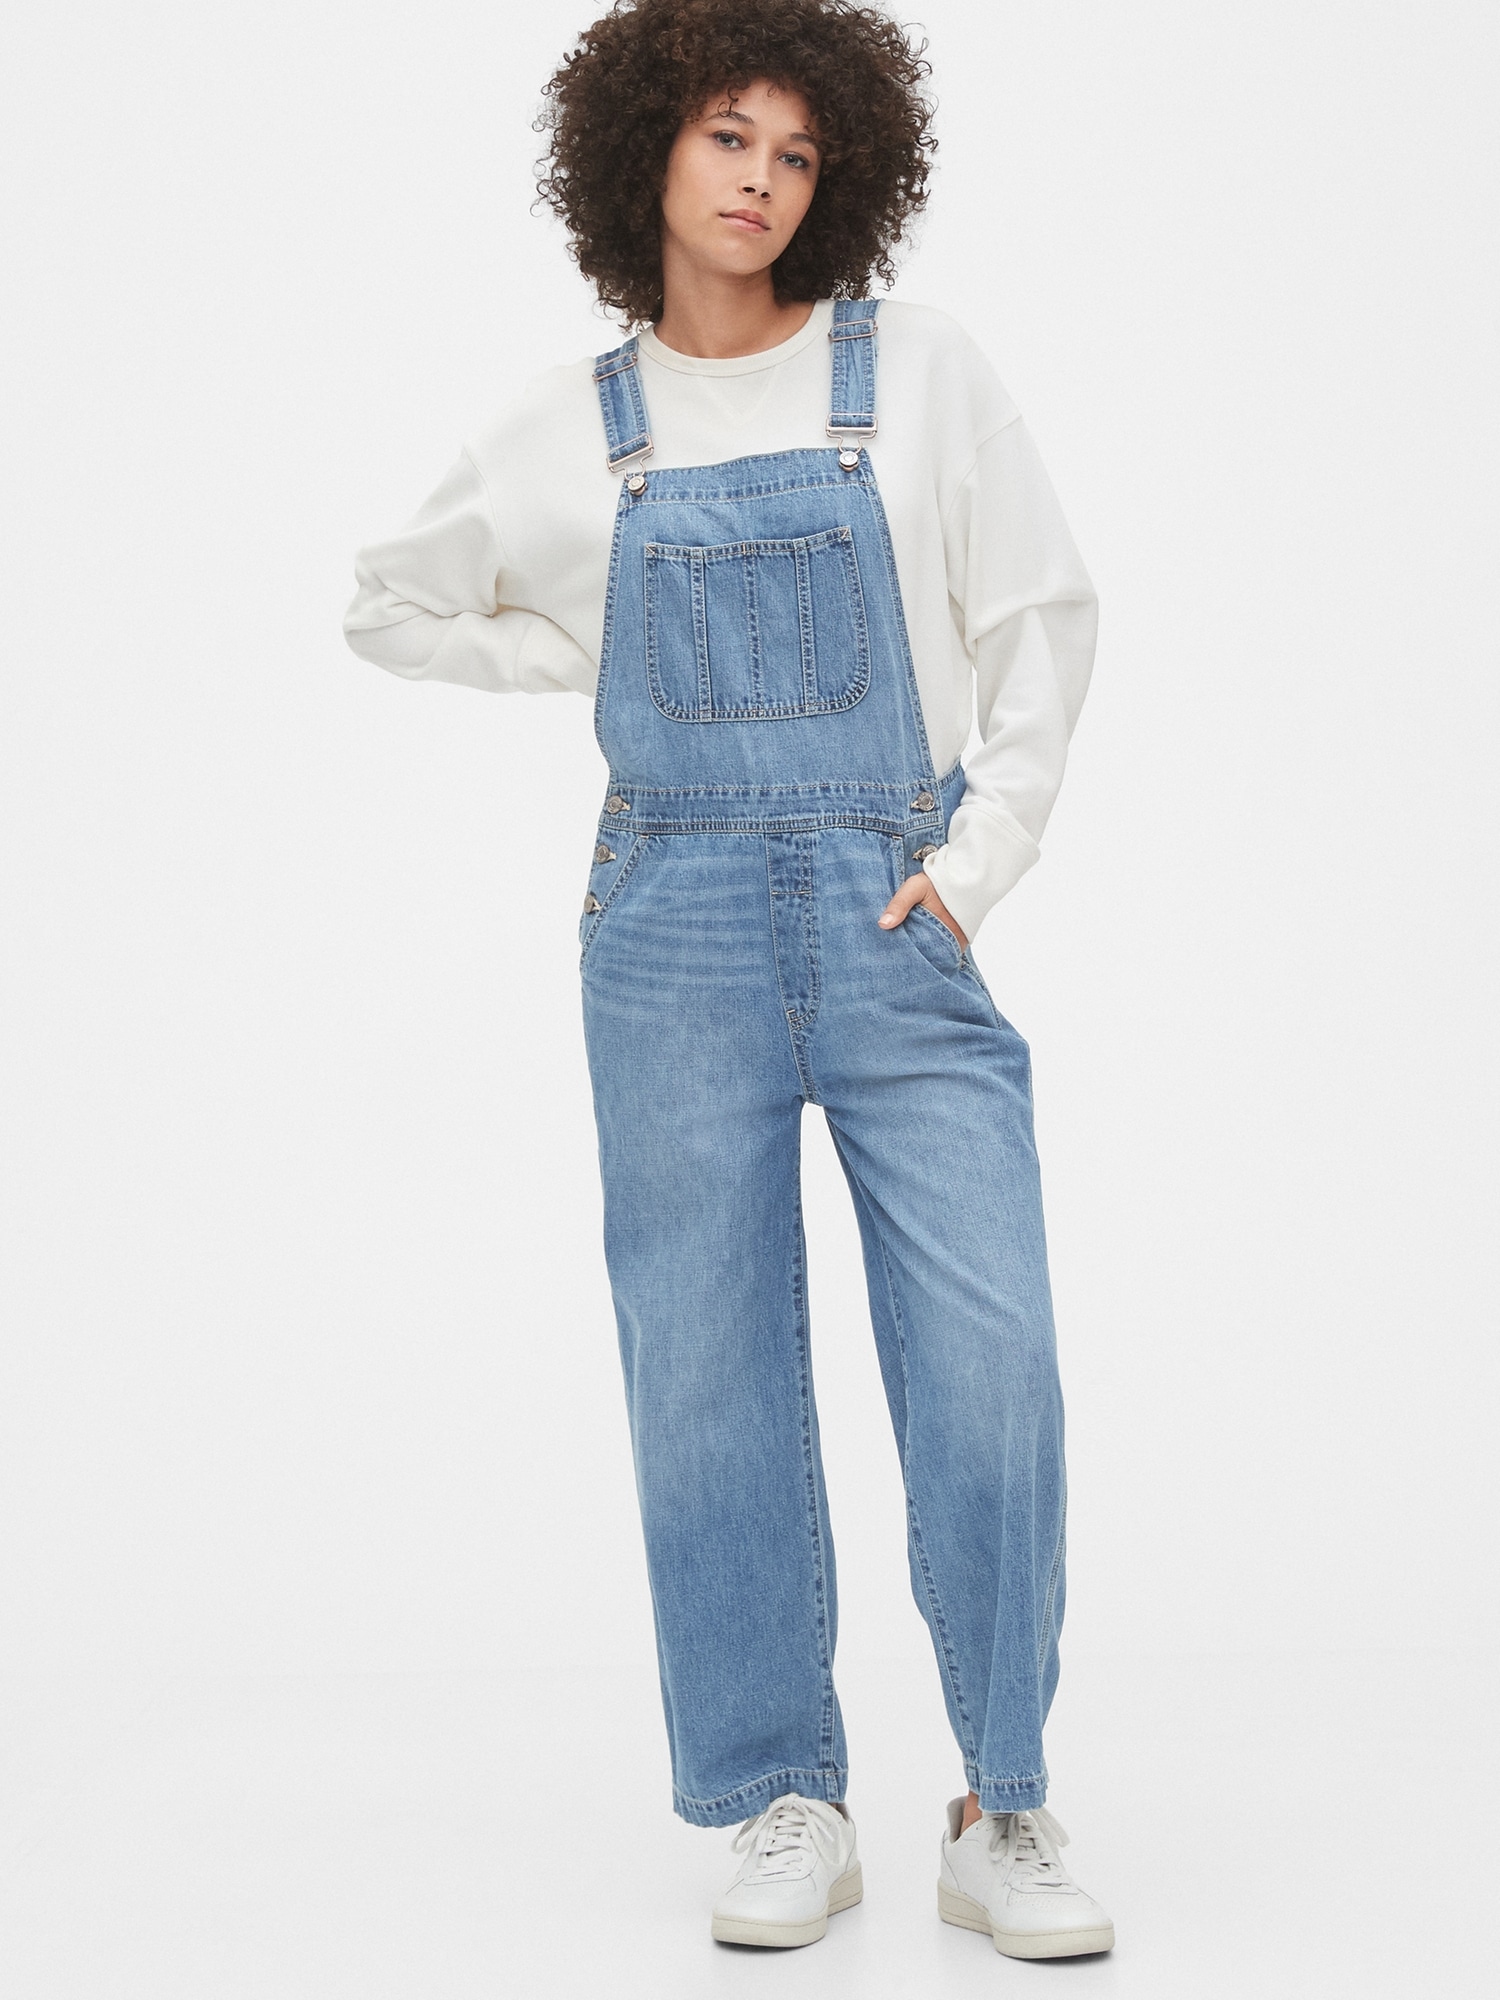 jeans overall jumpsuit